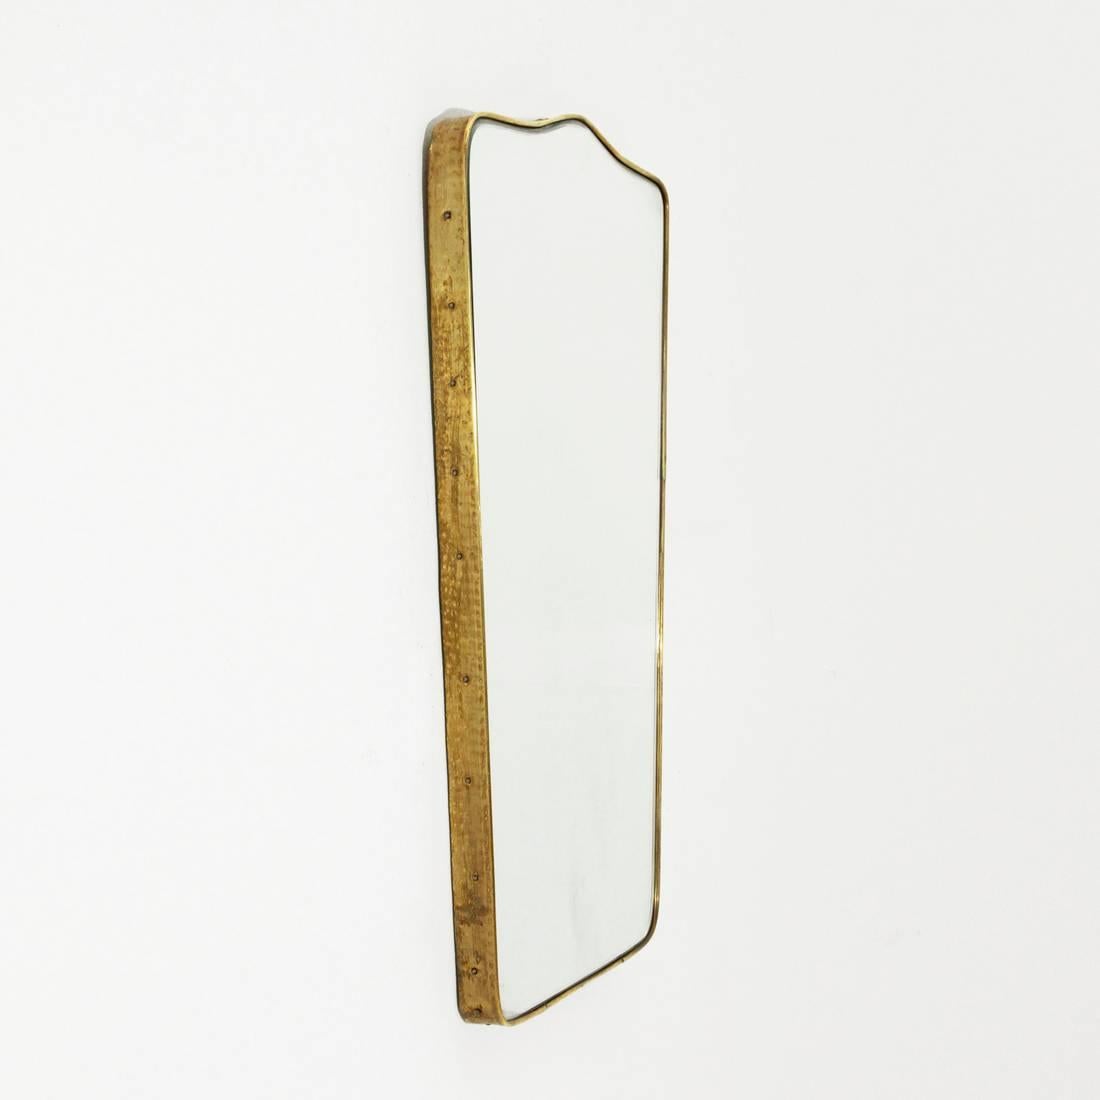 Italian mirror production of 1950s.
Wooden frame, mirrored glass with bevelled edge. Hammered brass frame.
Good general condition, some signs of wear on the mirror.

Dimensions: Width 42 cm, depth 3 cm, height 65 cm.